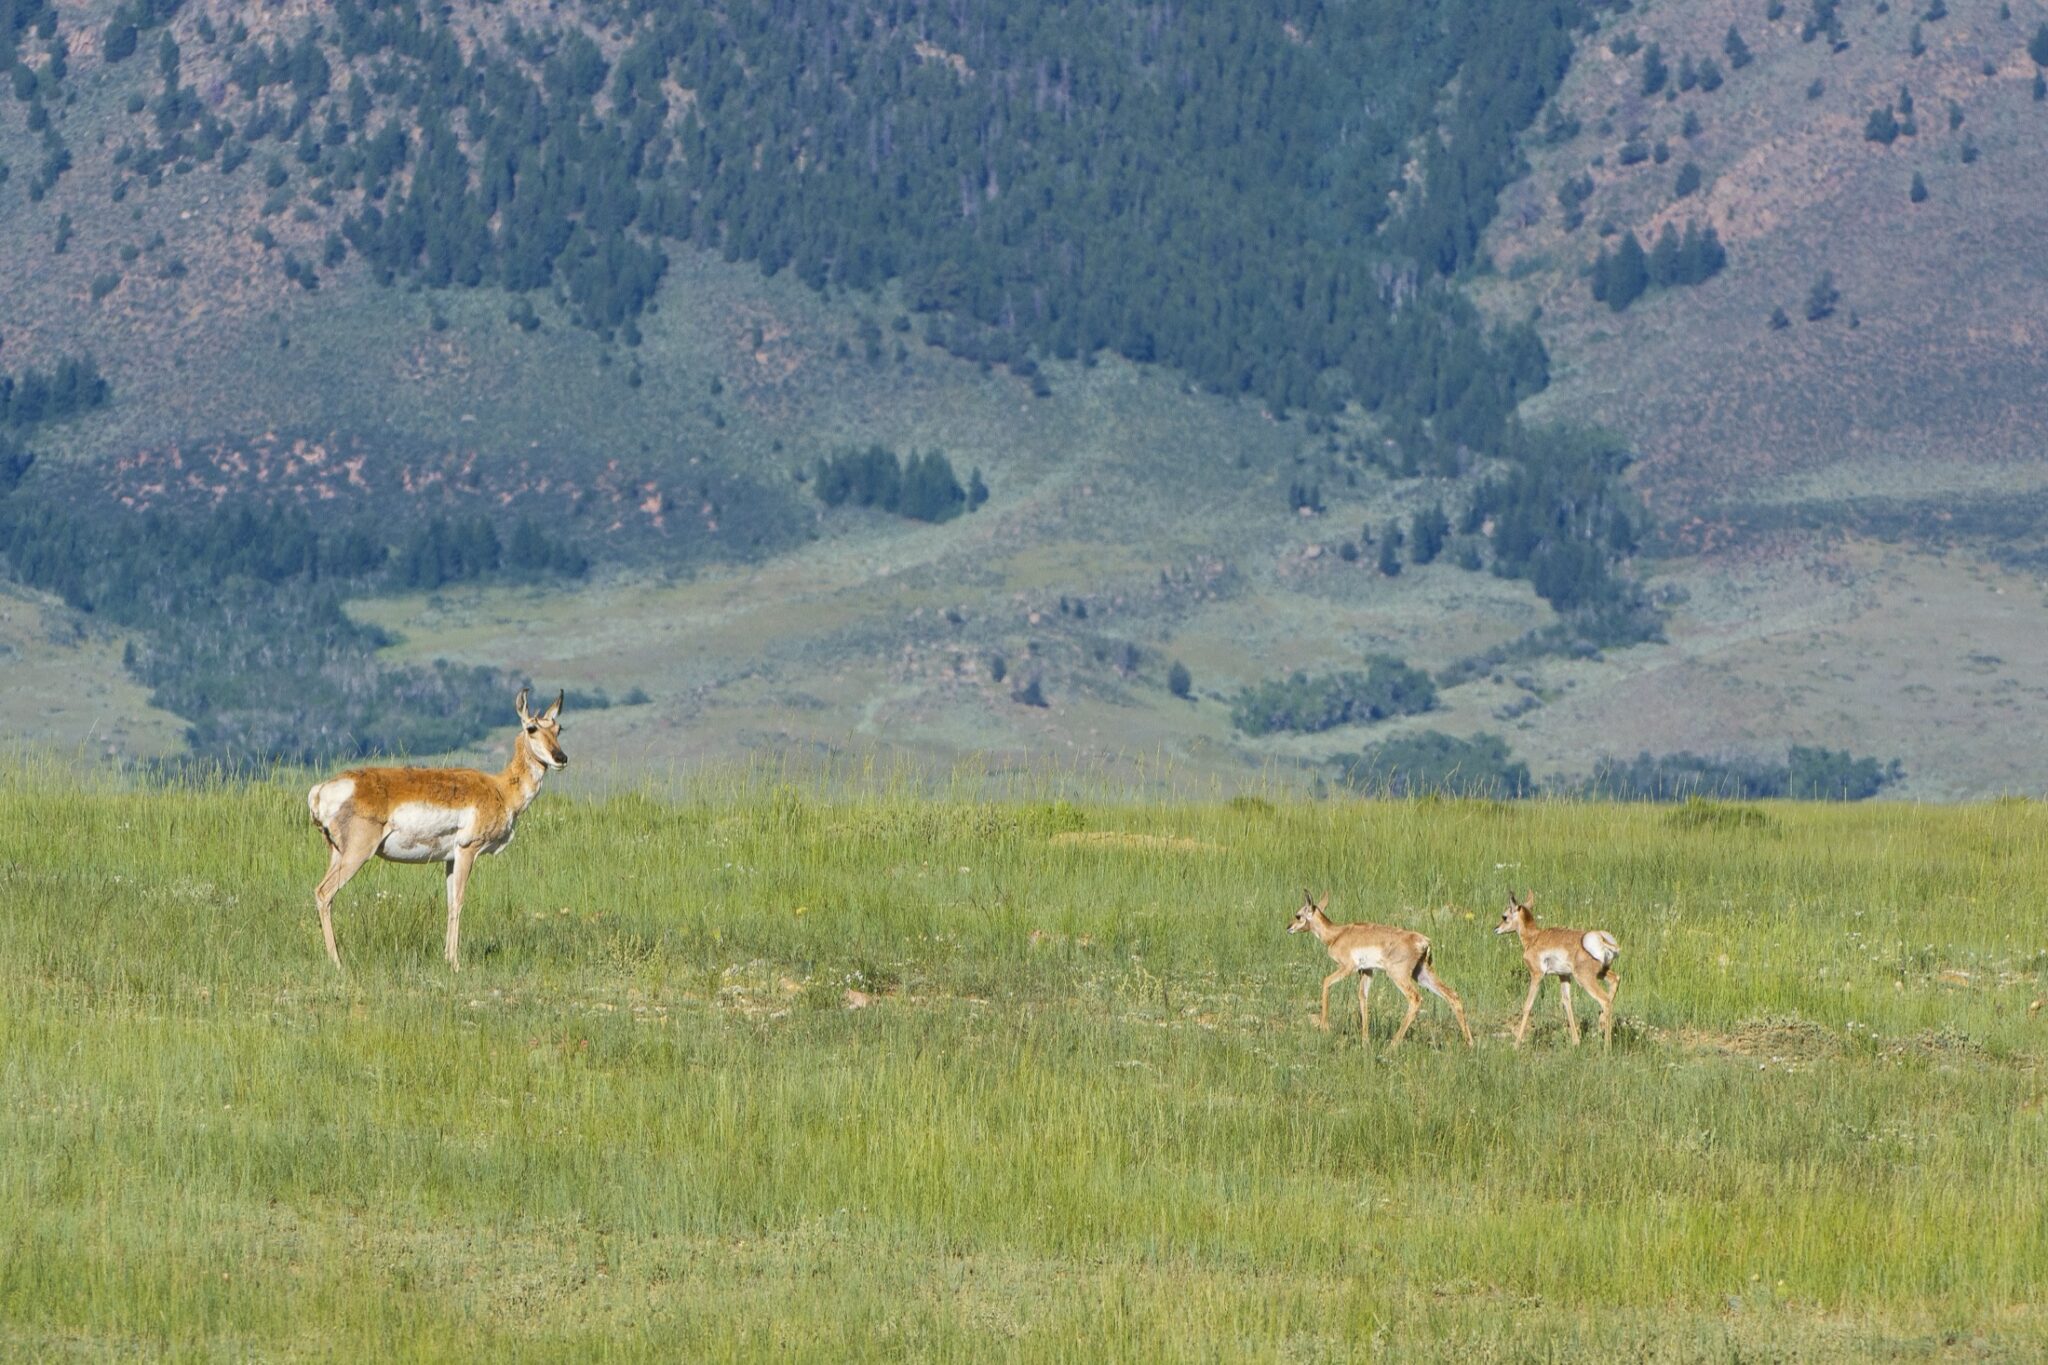 An antelope with its babies in front of a mountain